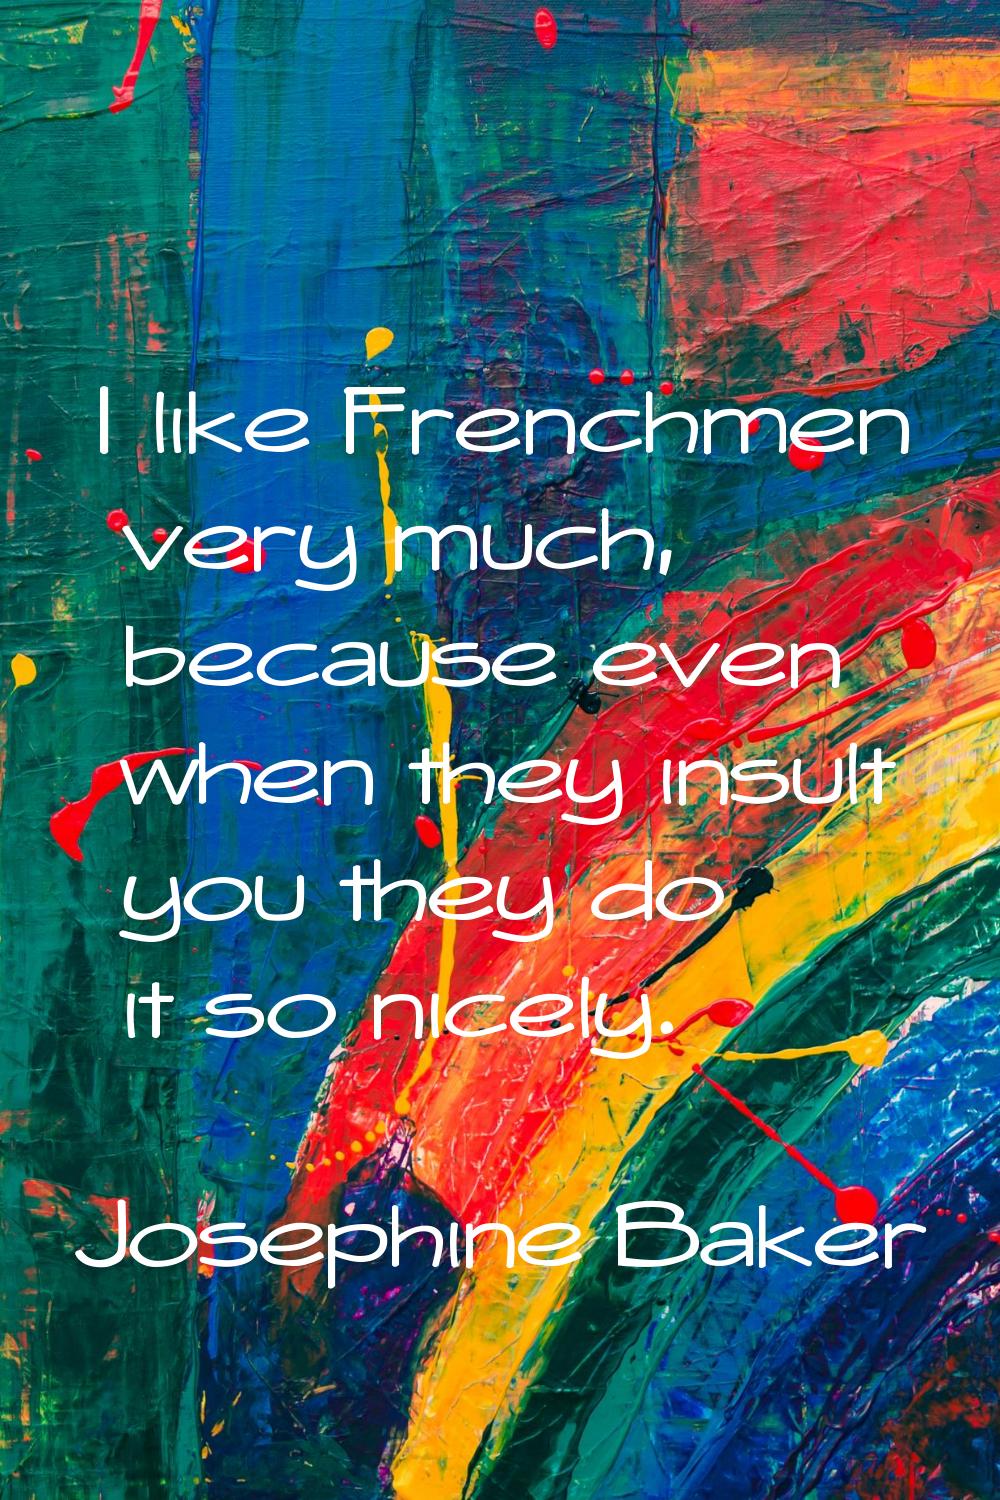 I like Frenchmen very much, because even when they insult you they do it so nicely.